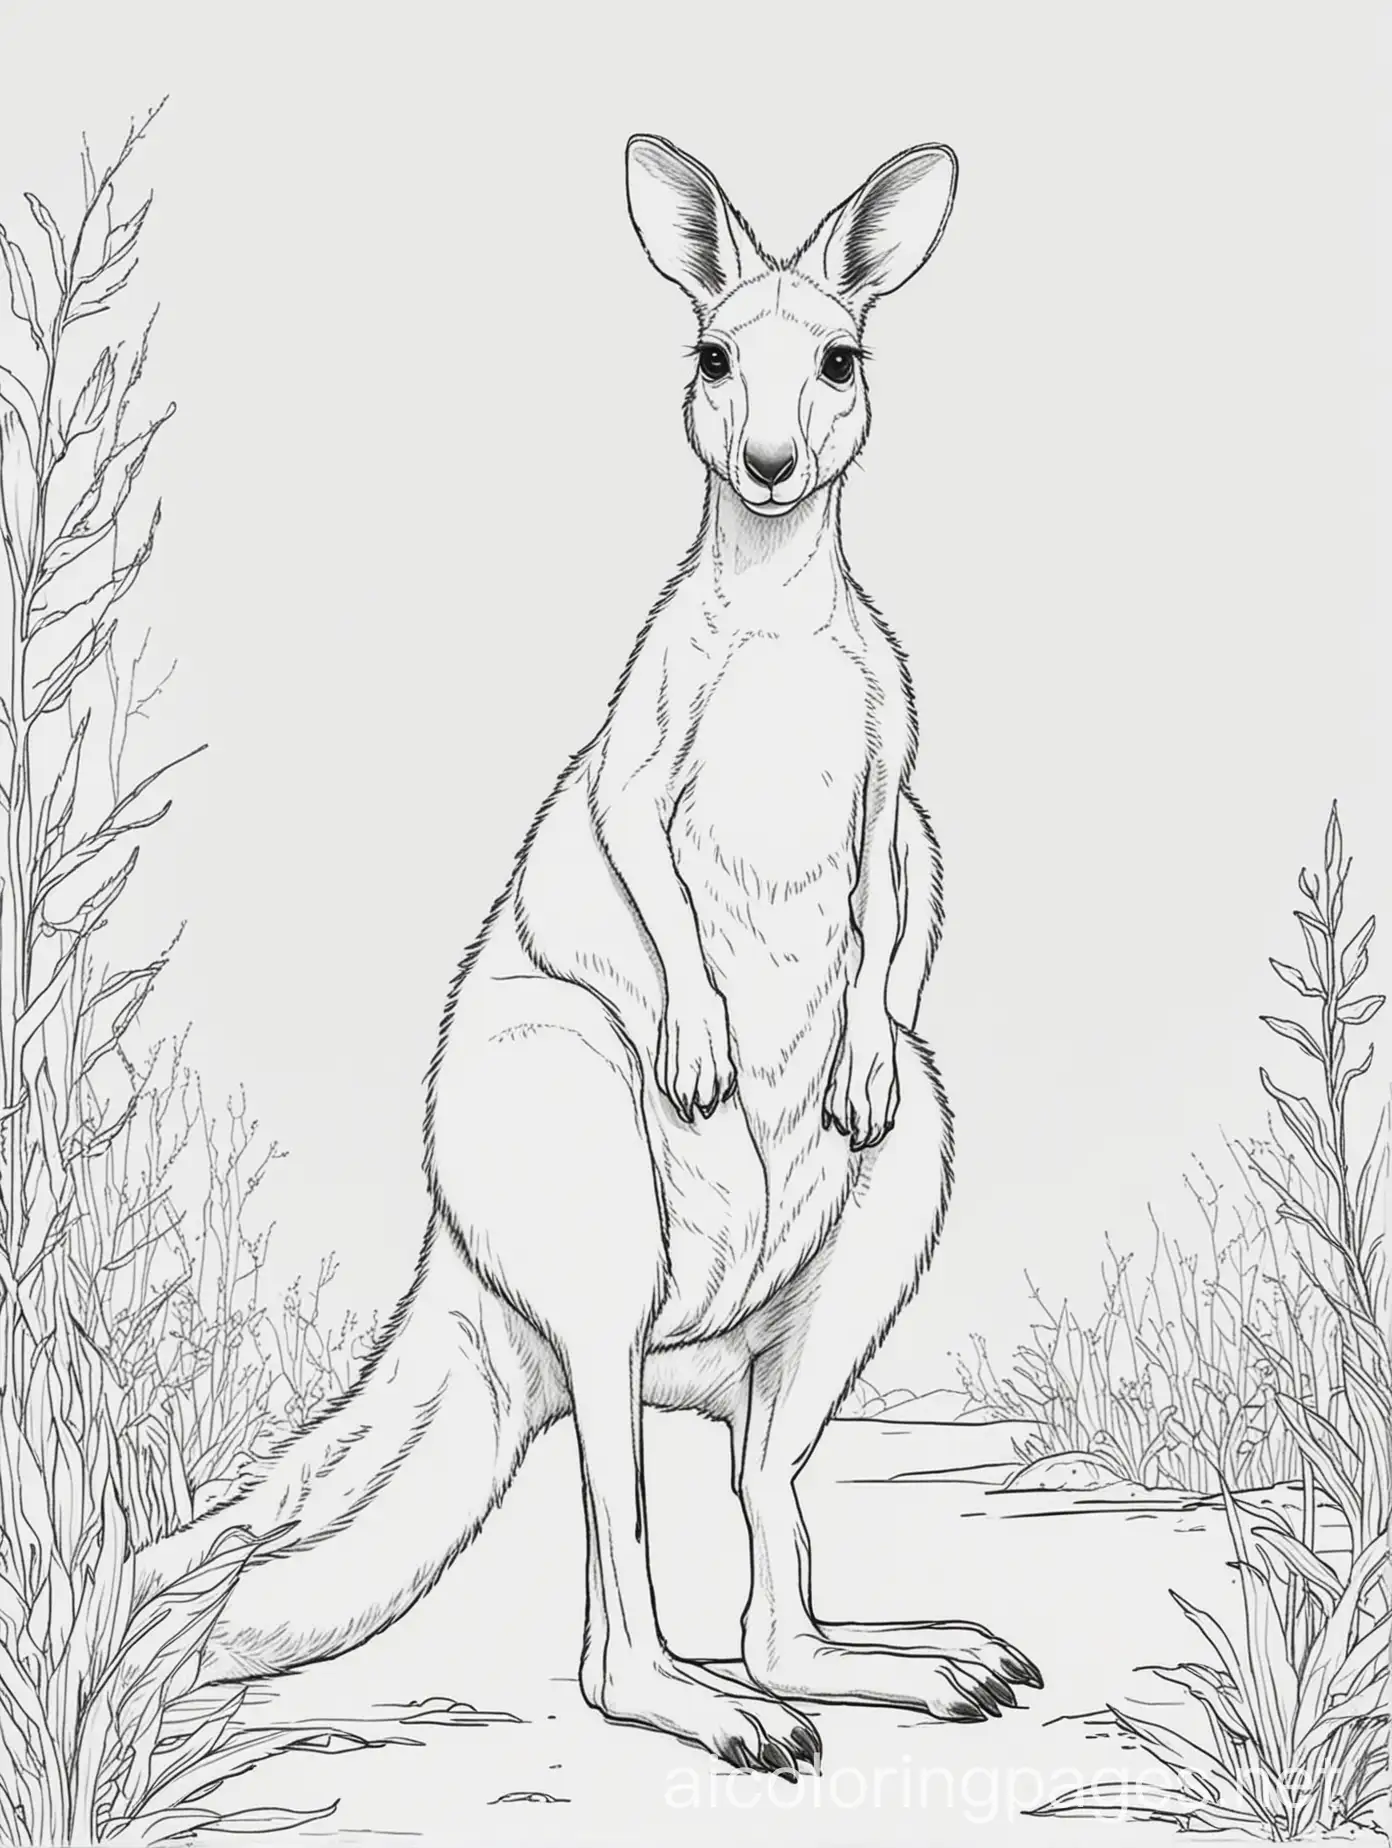 kangaroo , Coloring Page, black and white, line art, white background, Simplicity, Ample White Space. The background of the coloring page is plain white to make it easy for young children to color within the lines. The outlines of all the subjects are easy to distinguish, making it simple for kids to color without too much difficulty